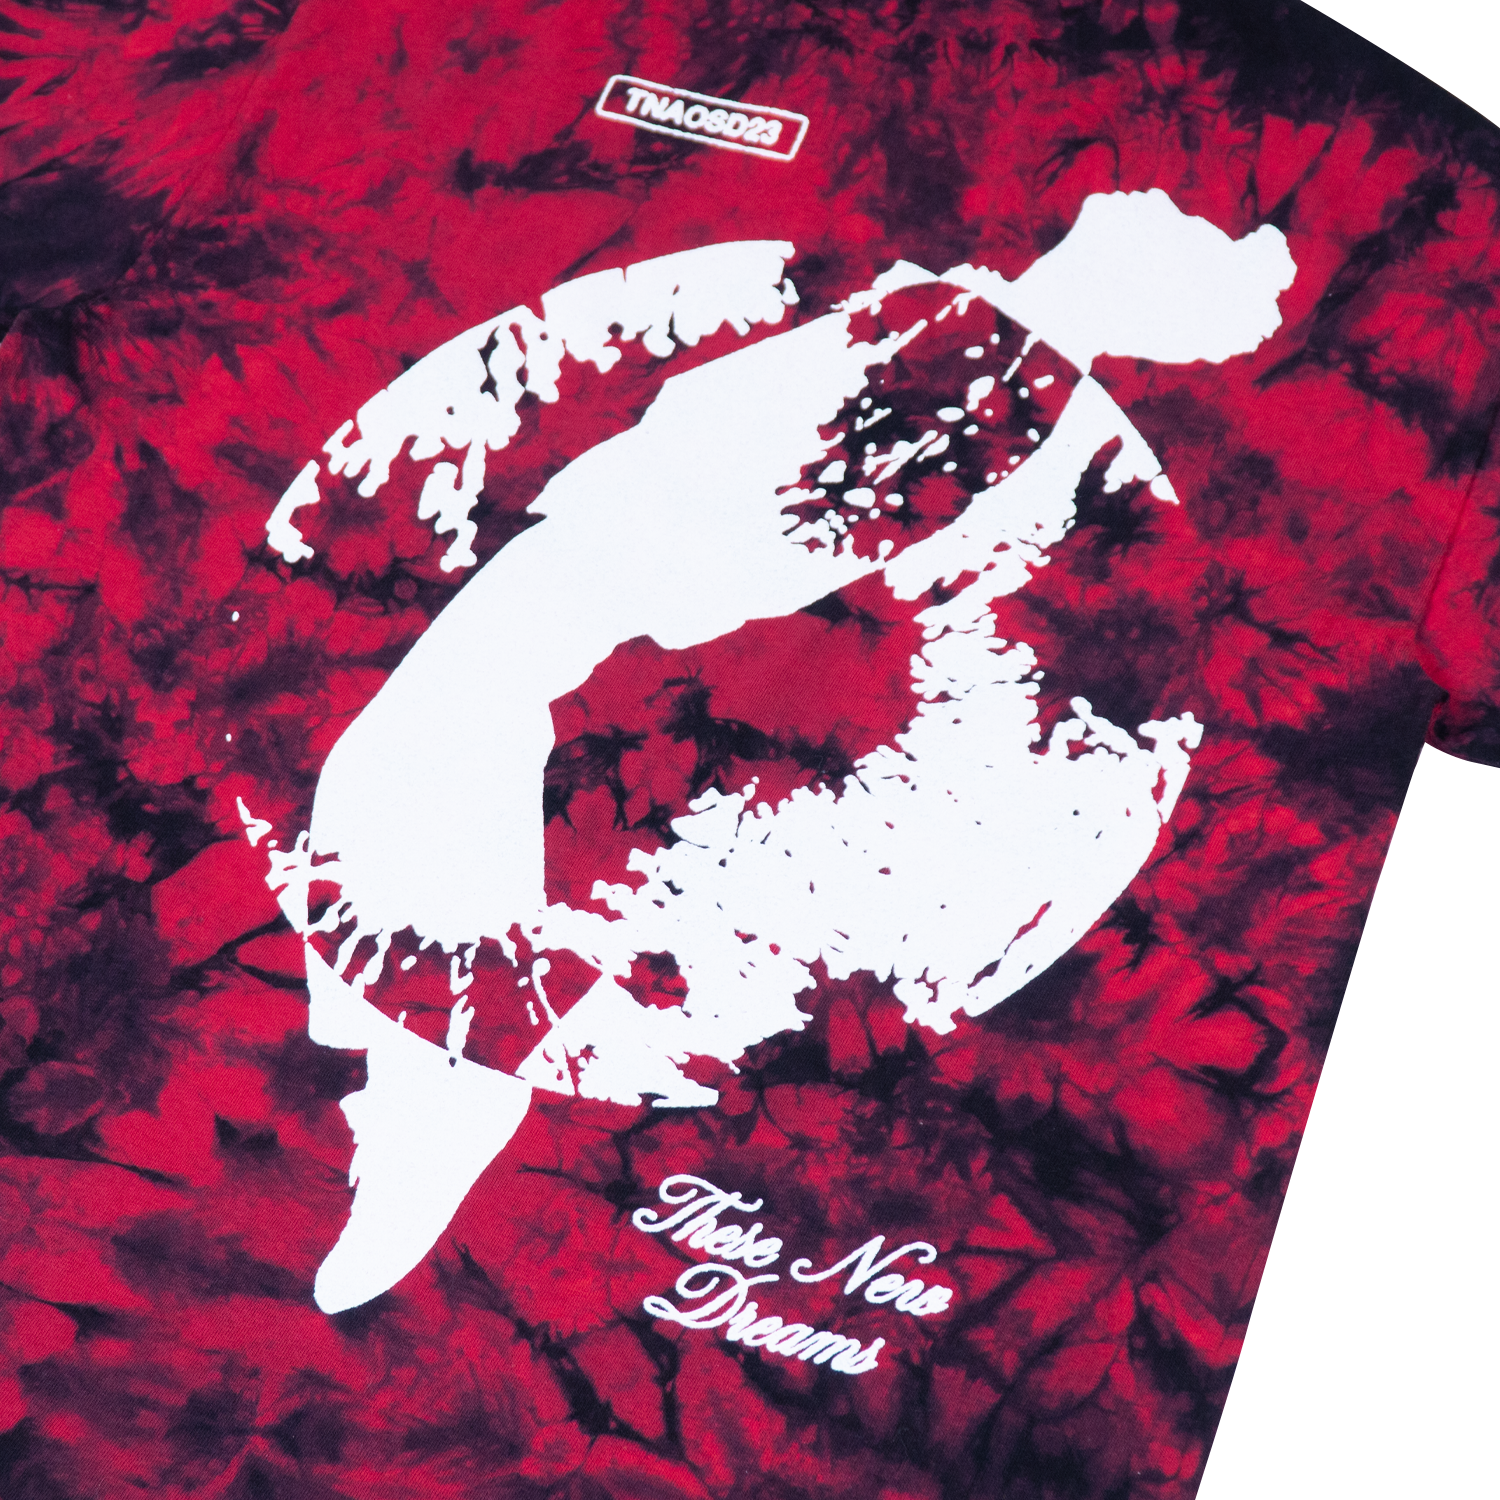 These New Dreams Black/Red Dye Tee